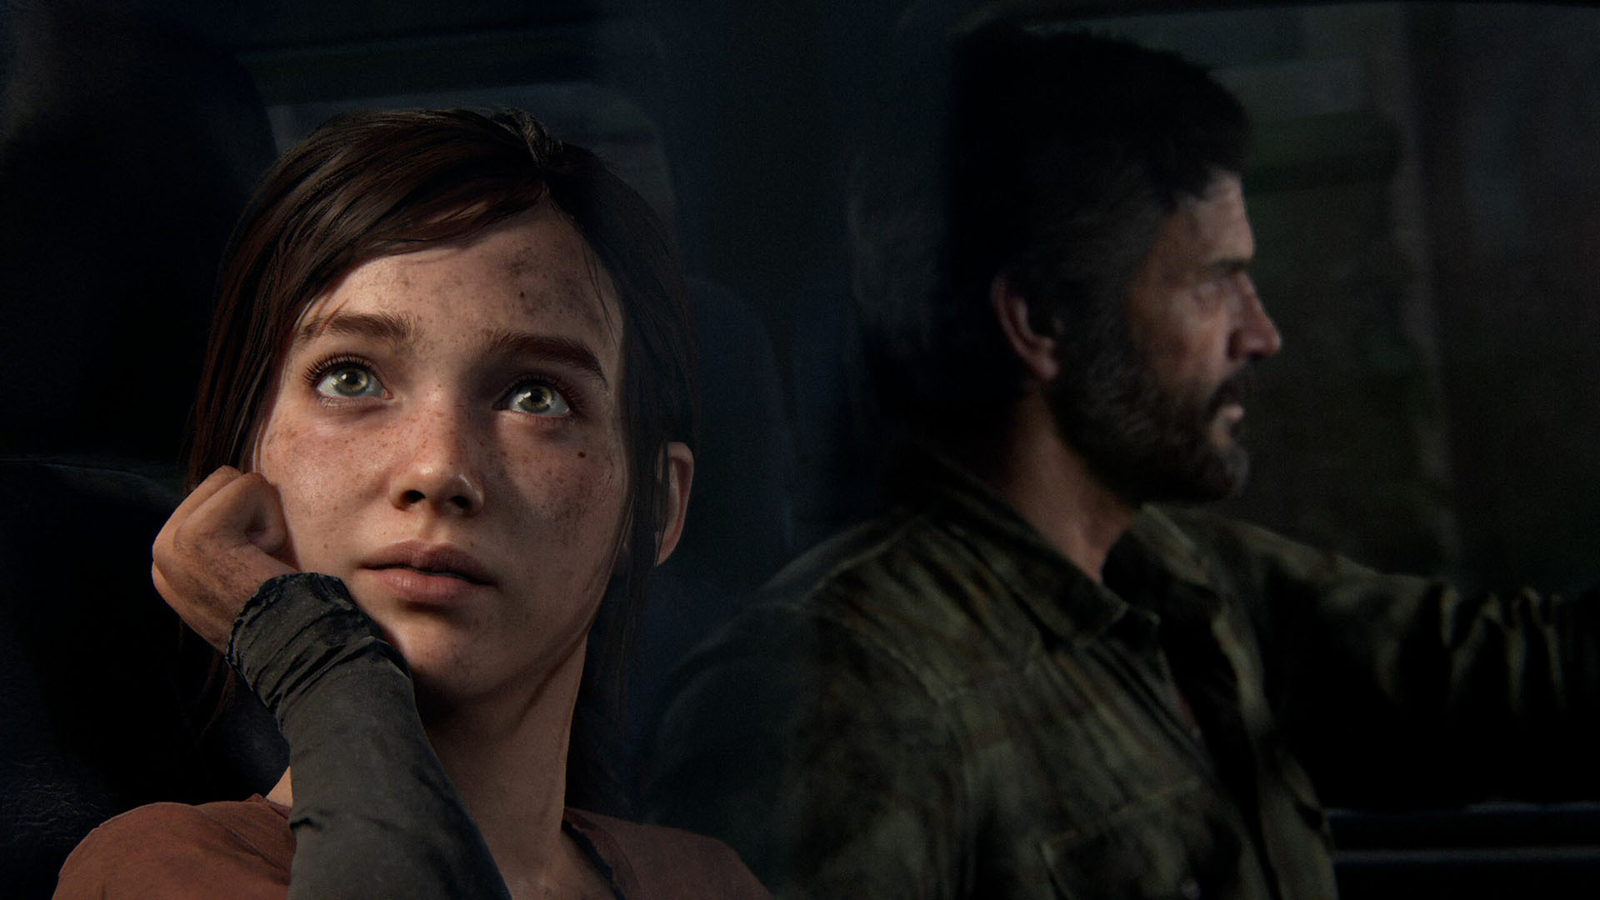 The Last of Us Part 1 PC Graphics Analysis – What is Going on With the PC